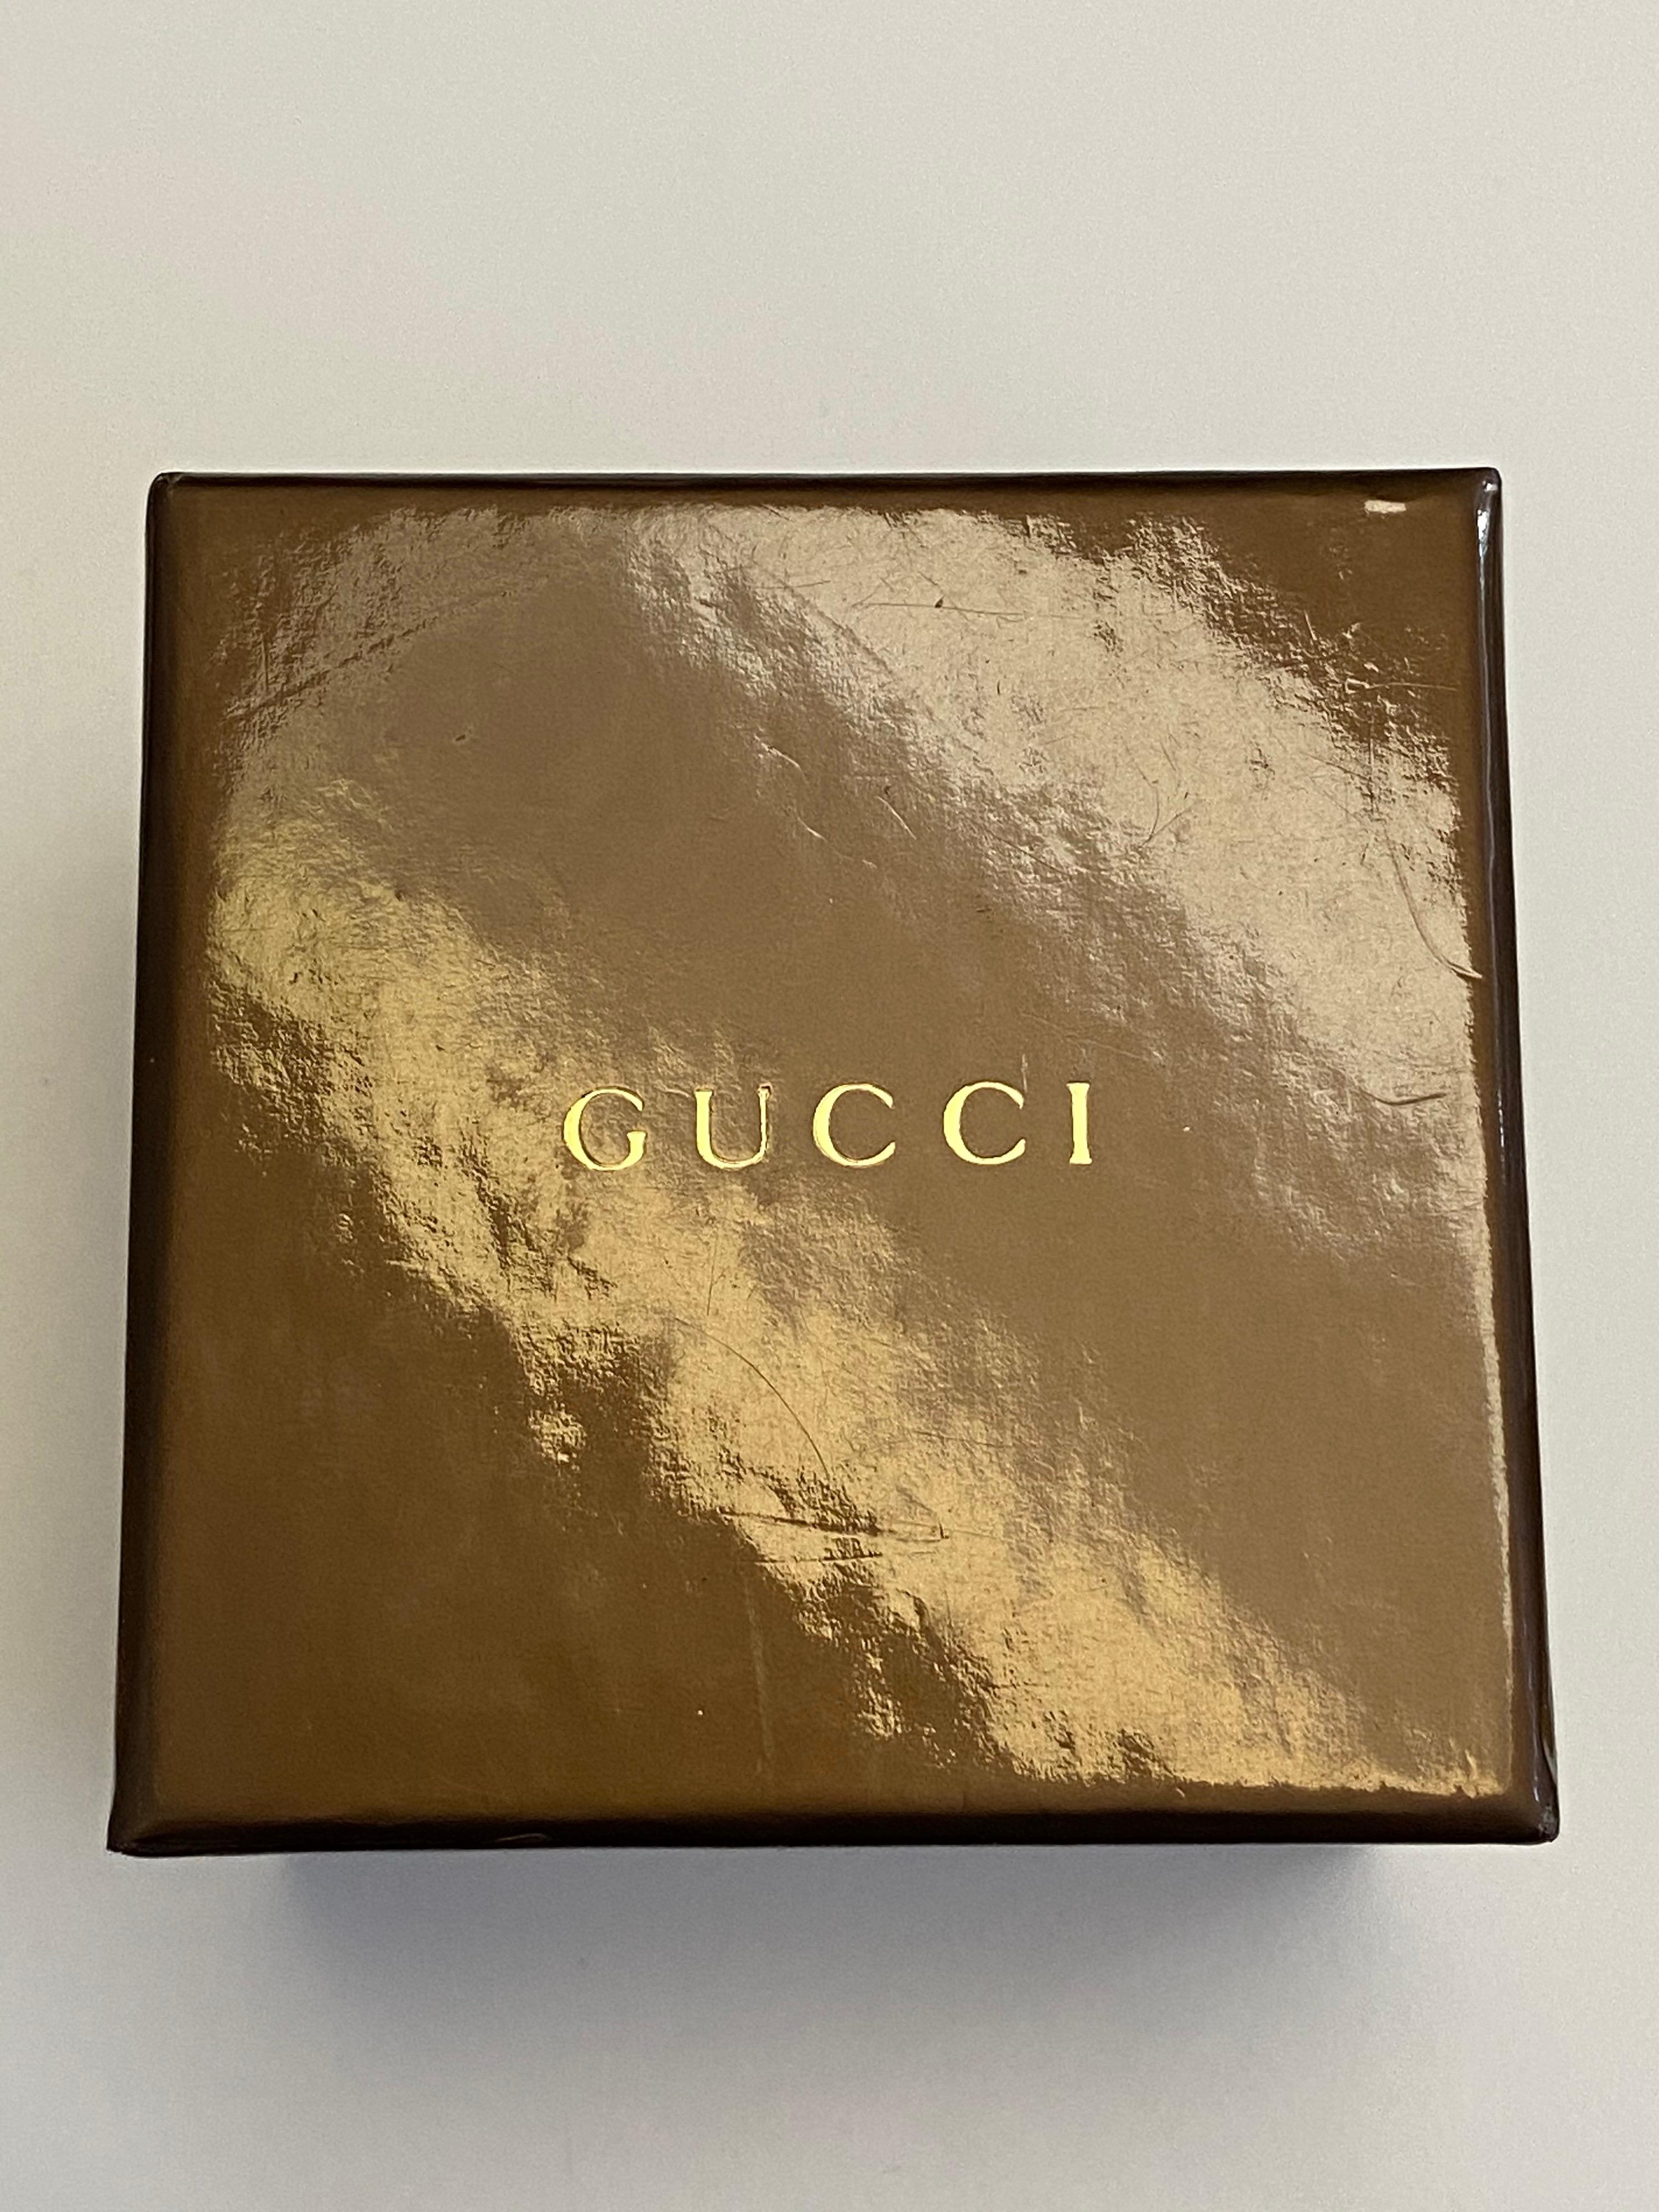 Gucci Horsebelt Mors Ring in 18k Yellow Gold Limited Addition 2